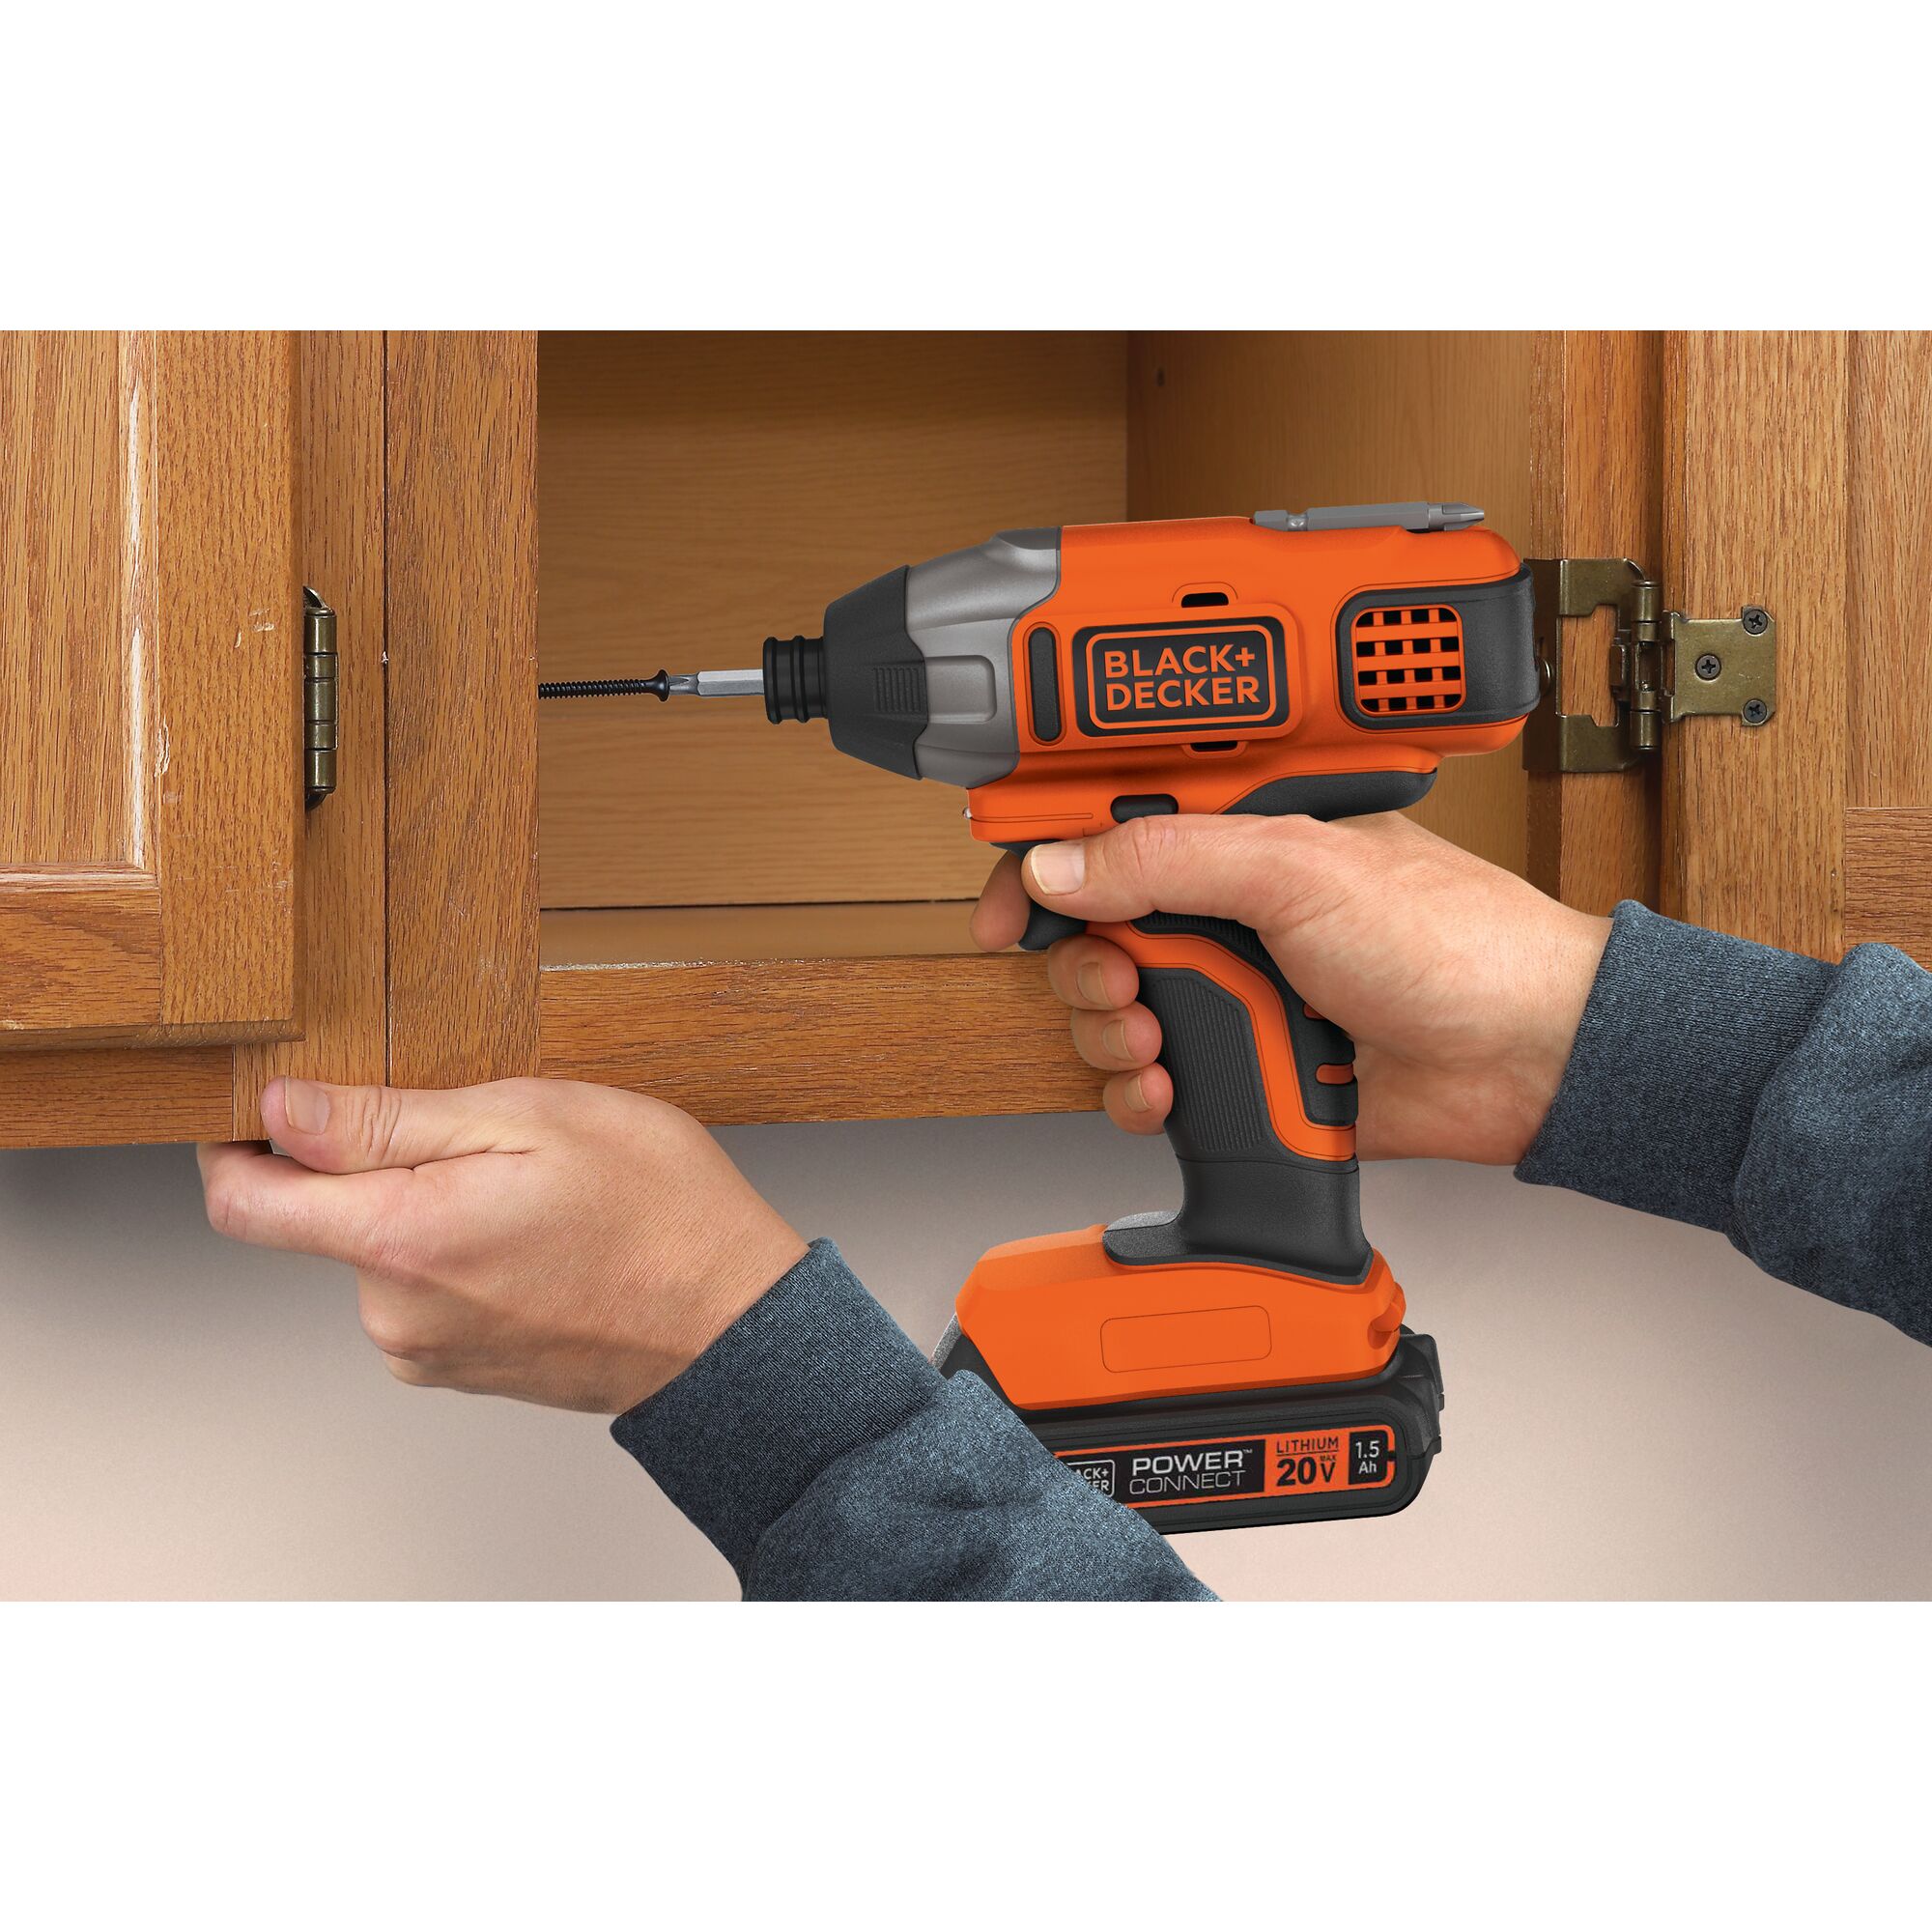 20 volt MAX lithium impact driver without battery and charger being used to drill hole in cabinet.